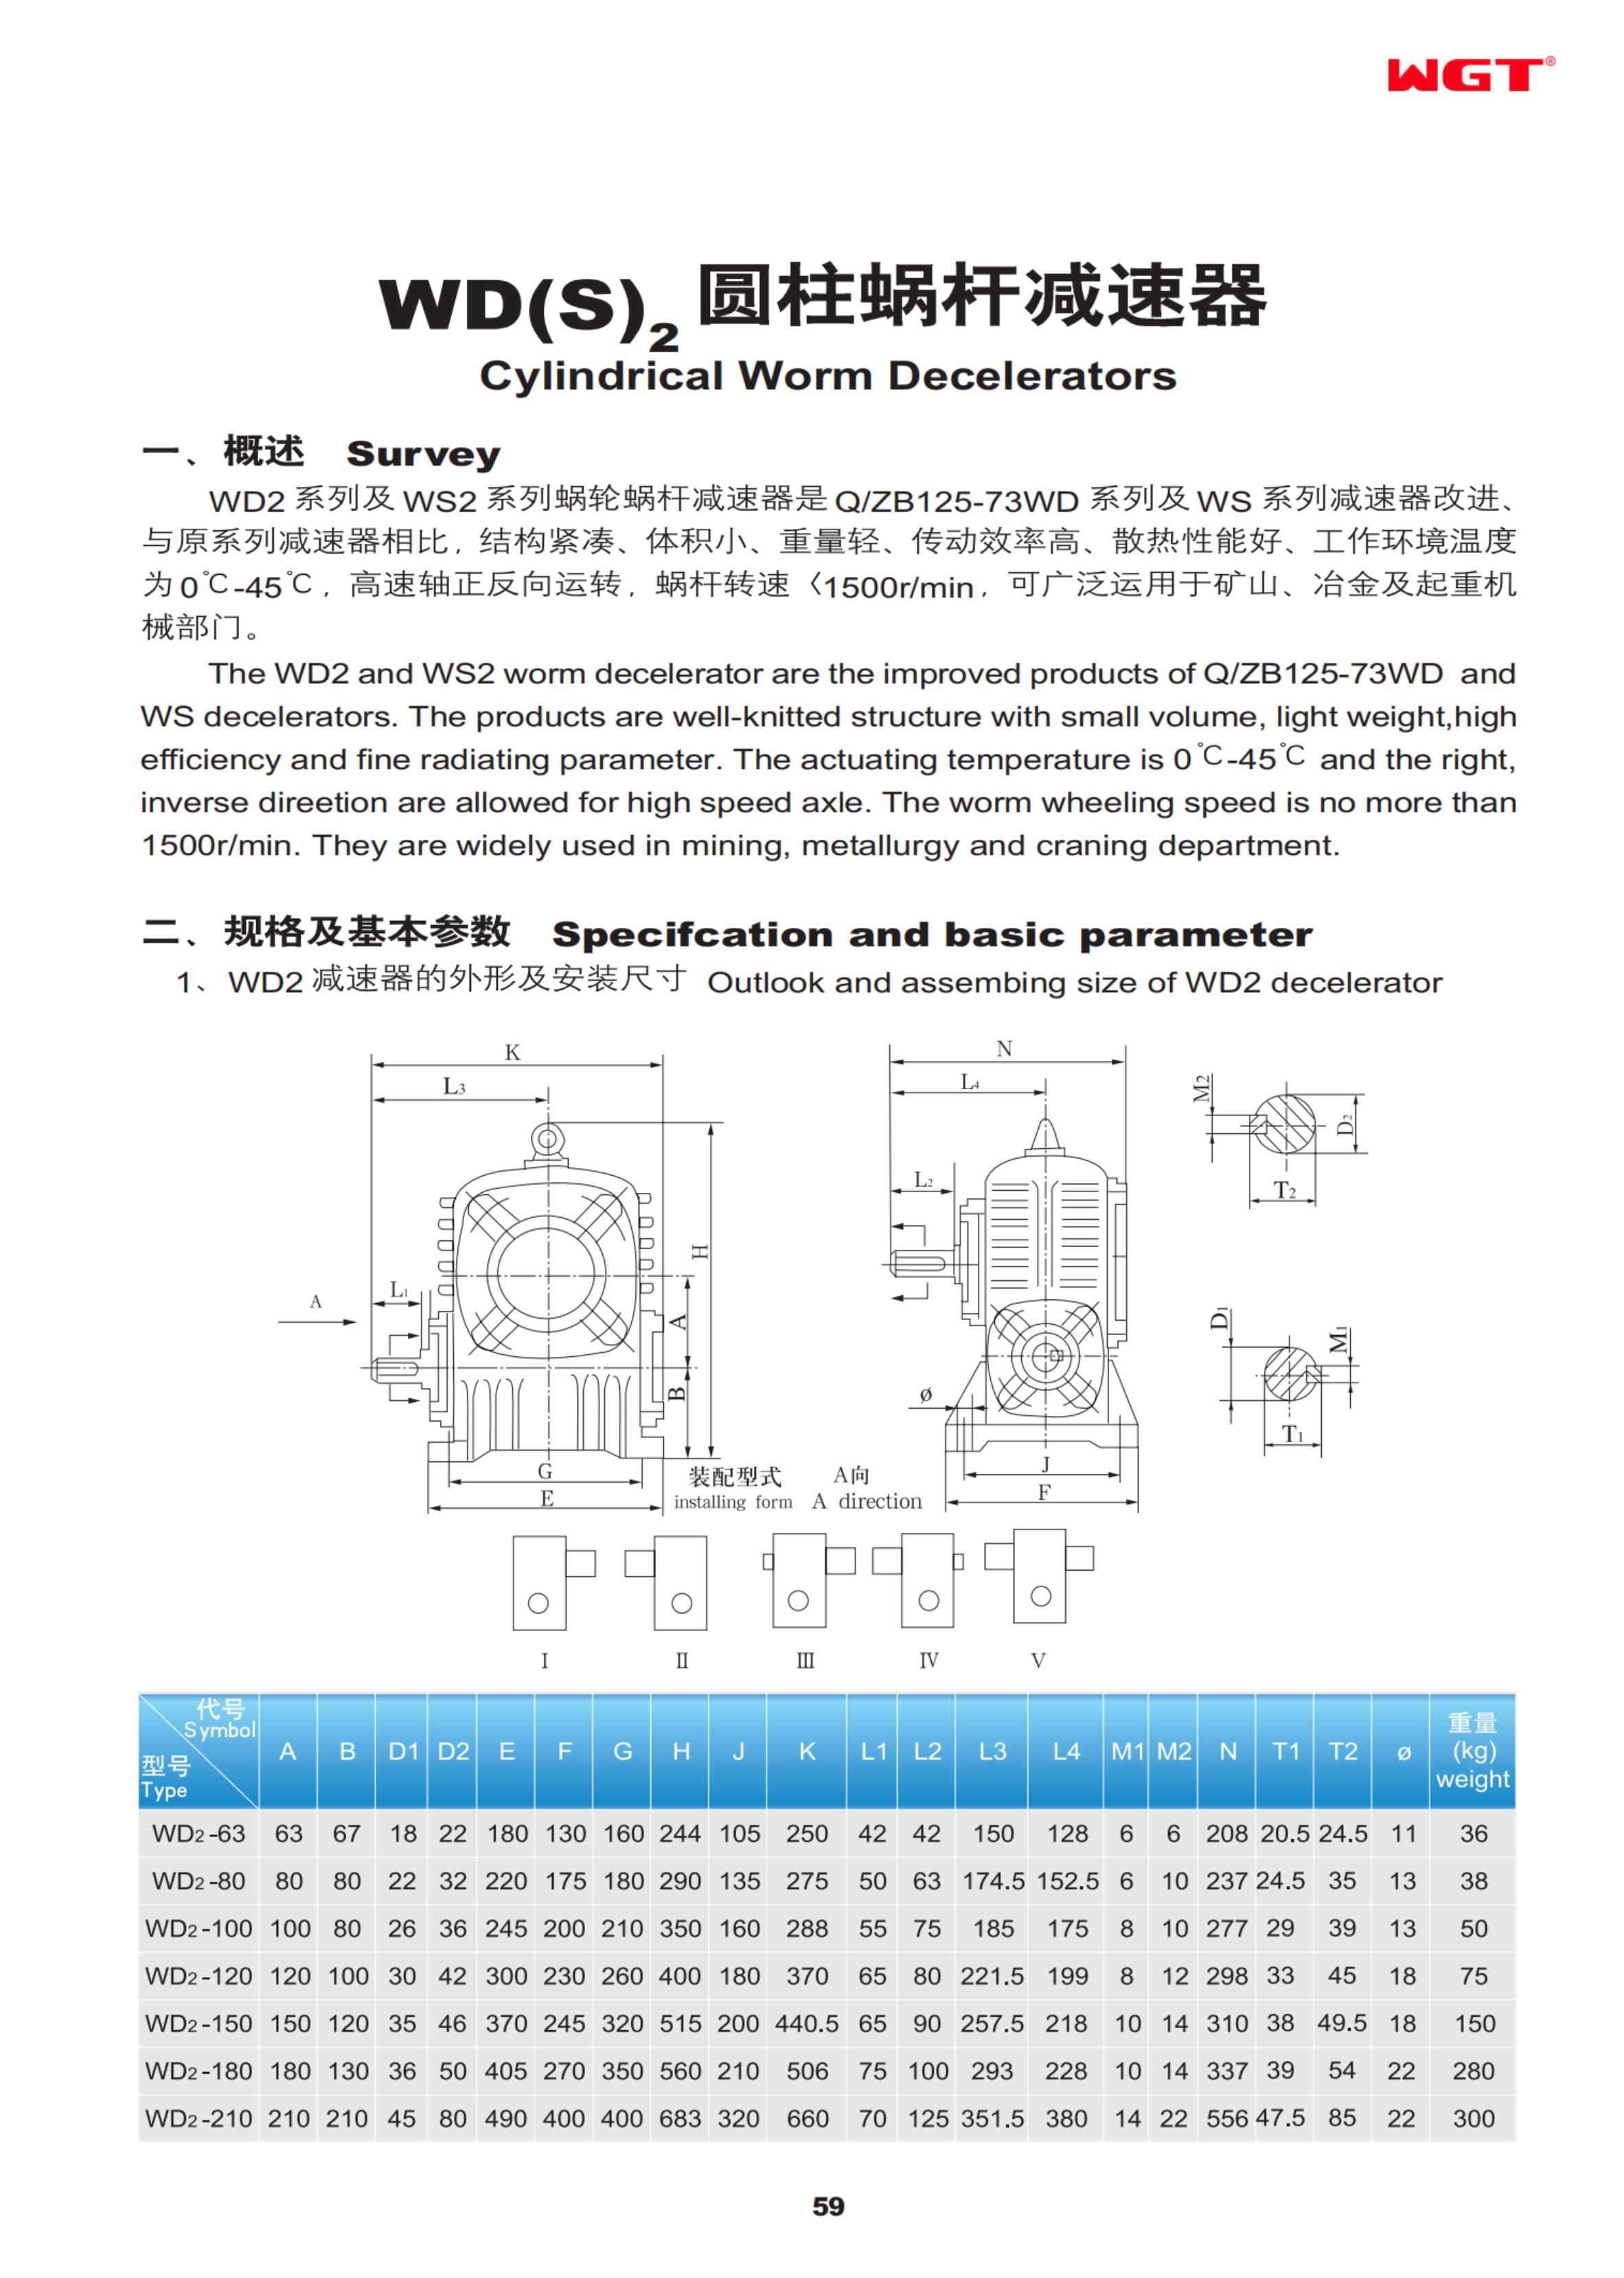 WD2-180 cylindrical worm reducer WGT